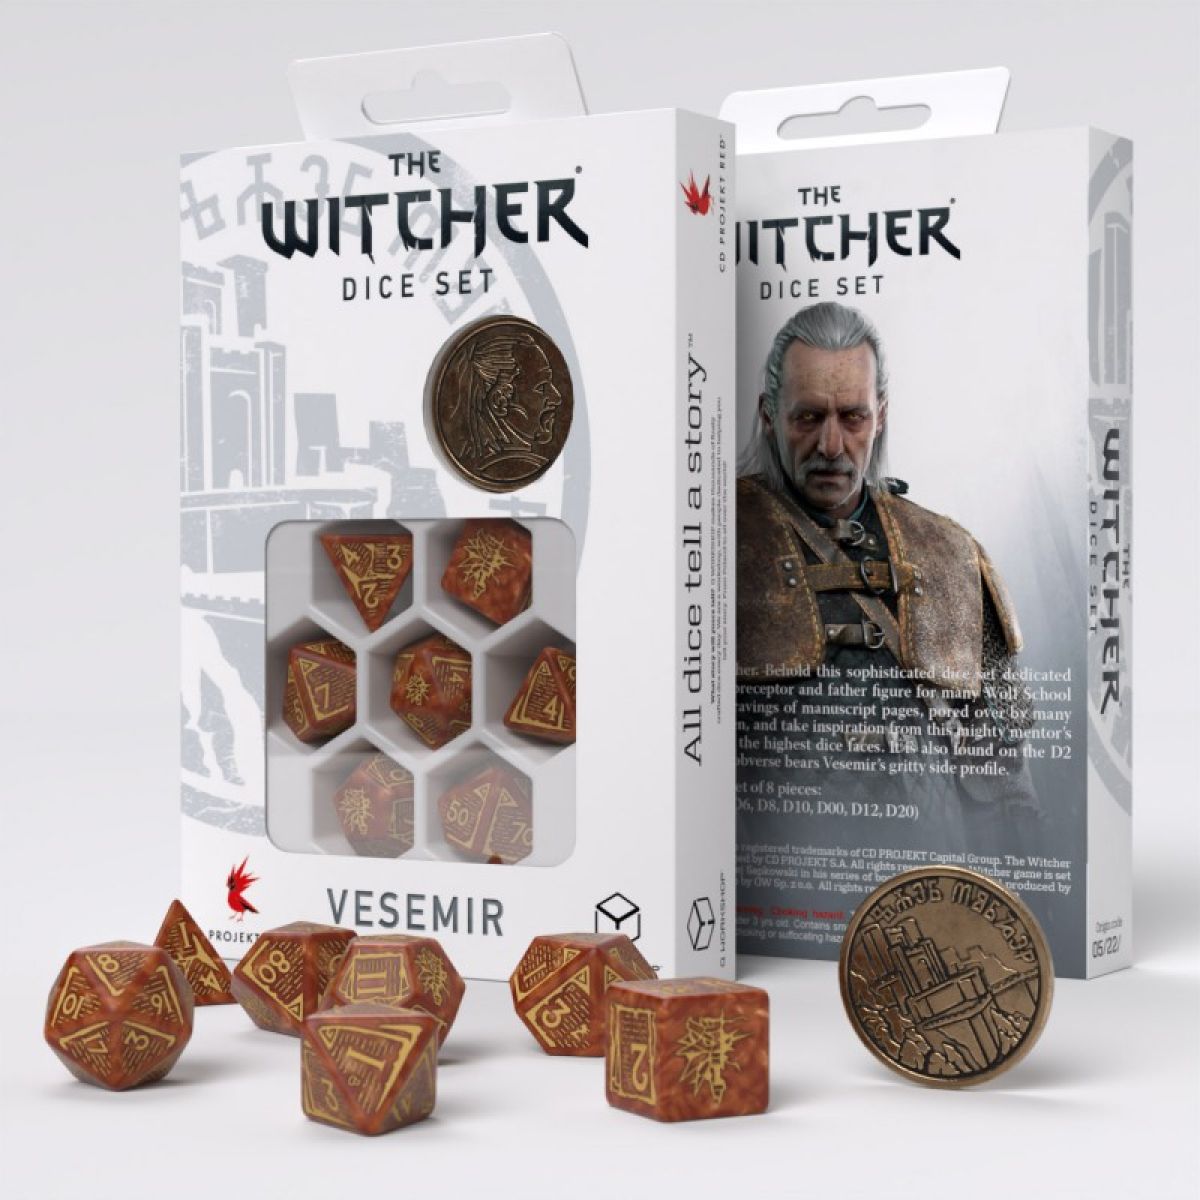 Q Workshop The Witcher Dice Set Vesemir - The Wise Witcher Dice Set 7 With Coin